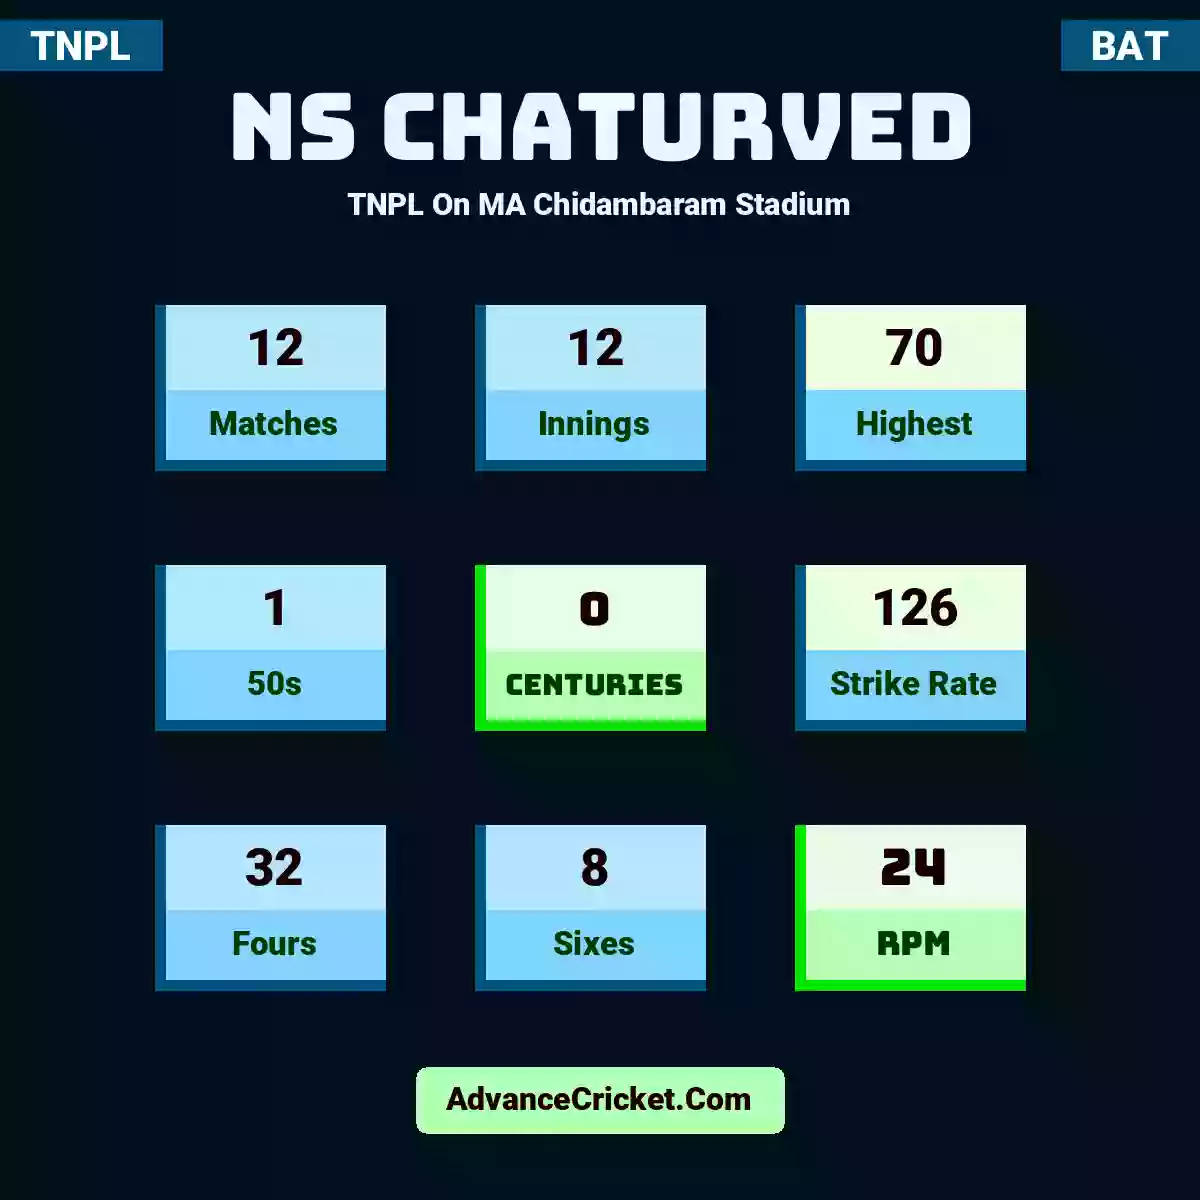 NS Chaturved TNPL  On MA Chidambaram Stadium, NS Chaturved played 12 matches, scored 70 runs as highest, 1 half-centuries, and 0 centuries, with a strike rate of 126. N.Chaturved hit 32 fours and 8 sixes, with an RPM of 24.